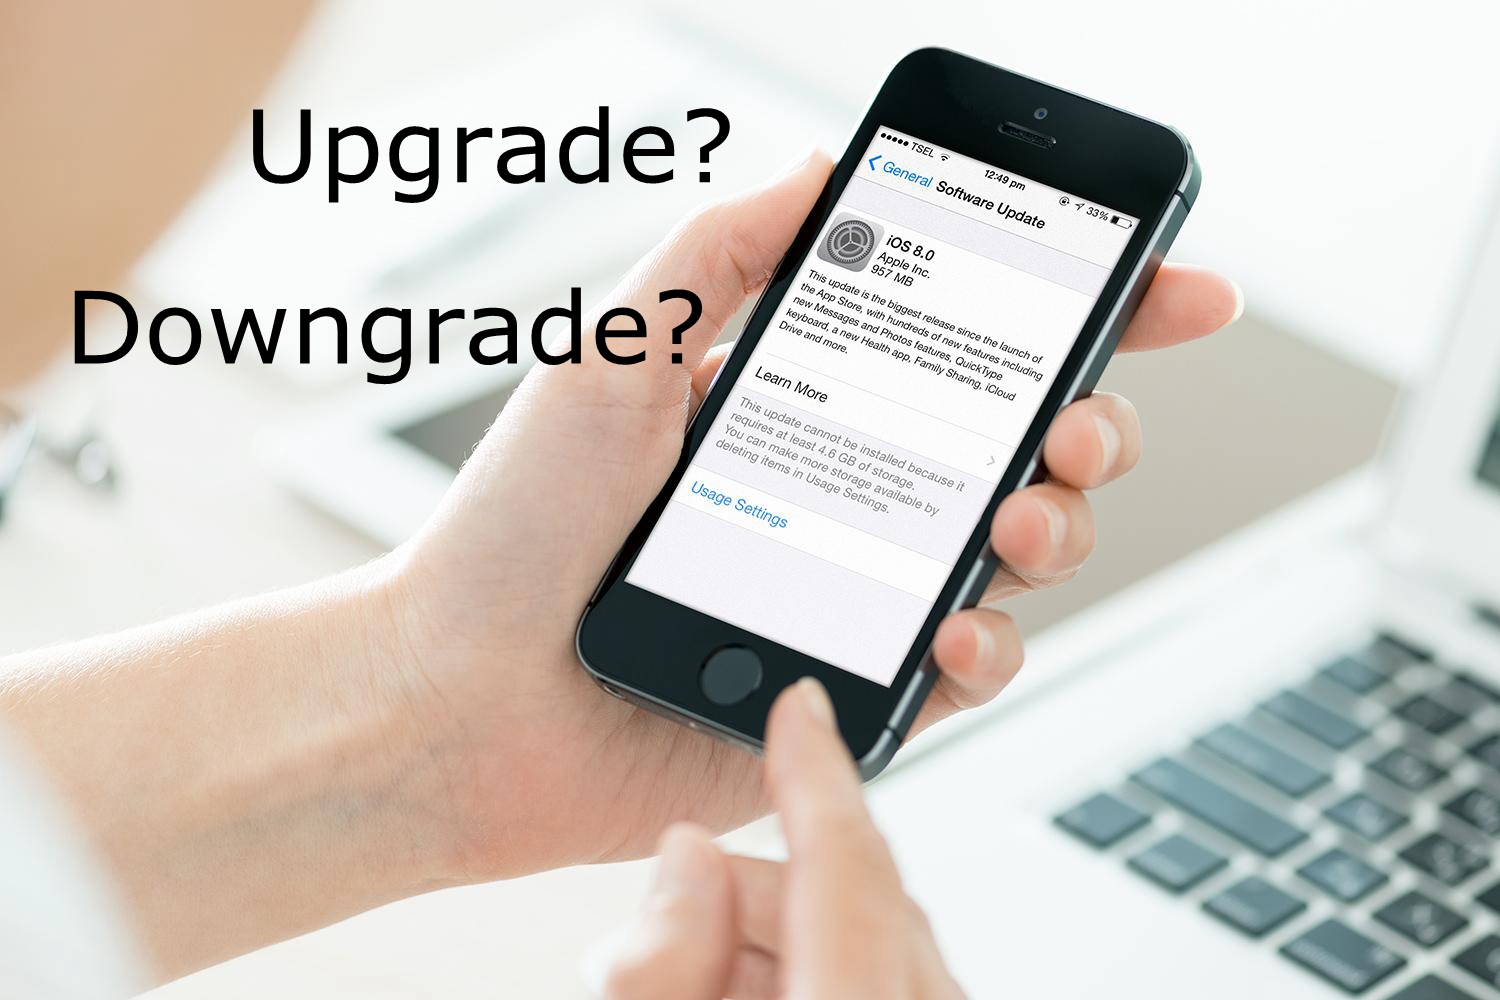 Roundup: Which iOS I Can Downgrade or Upgrade in 3uTools?